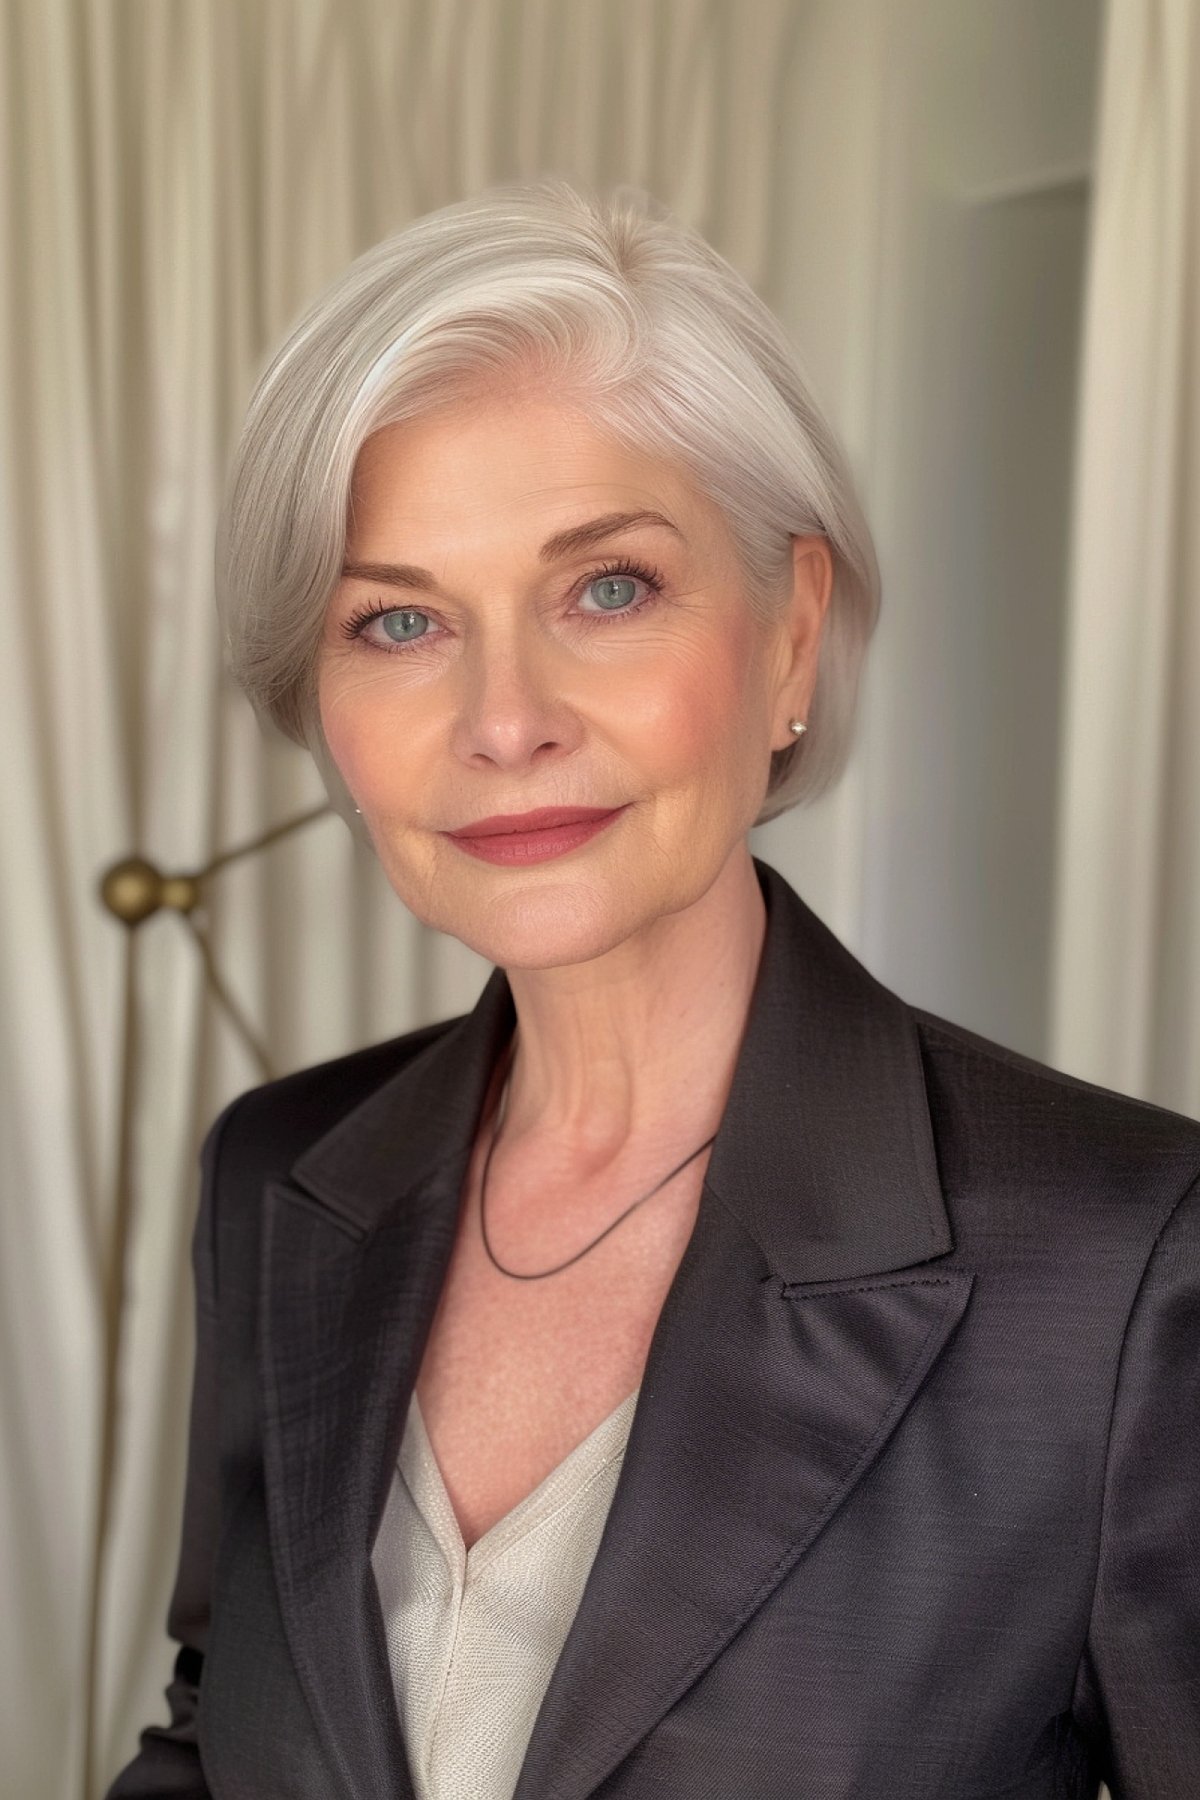 Mature woman with an elegant silver layered bob hairstyle